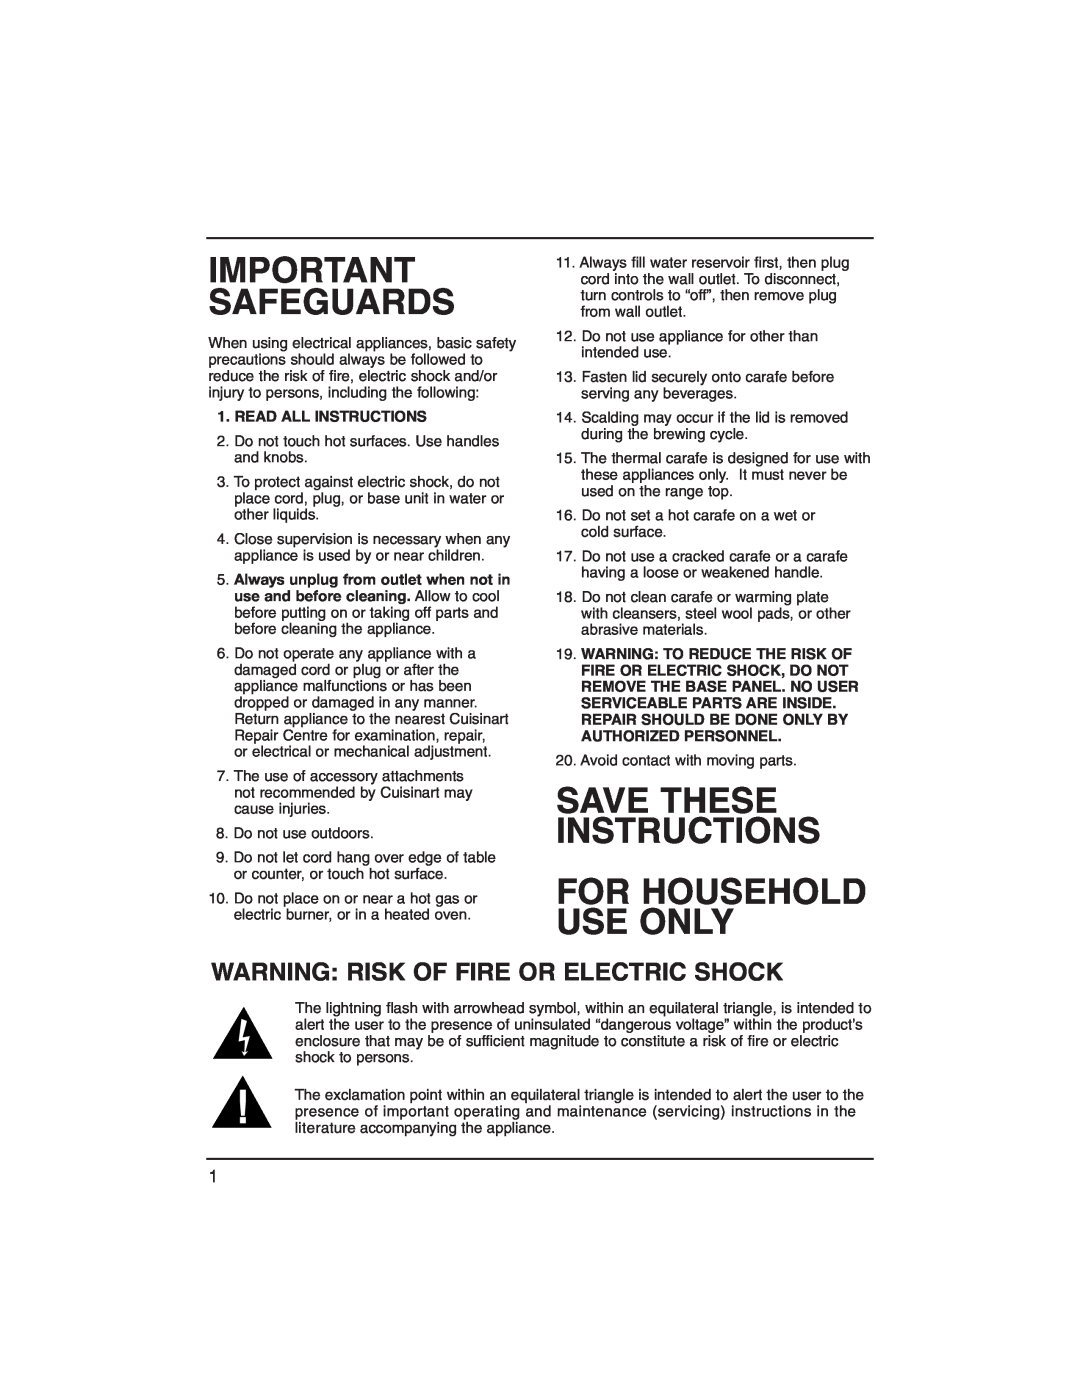 Cuisinart DCC-1400C manual Warning Risk Of Fire Or Electric Shock, Read All Instructions, Important Safeguards 